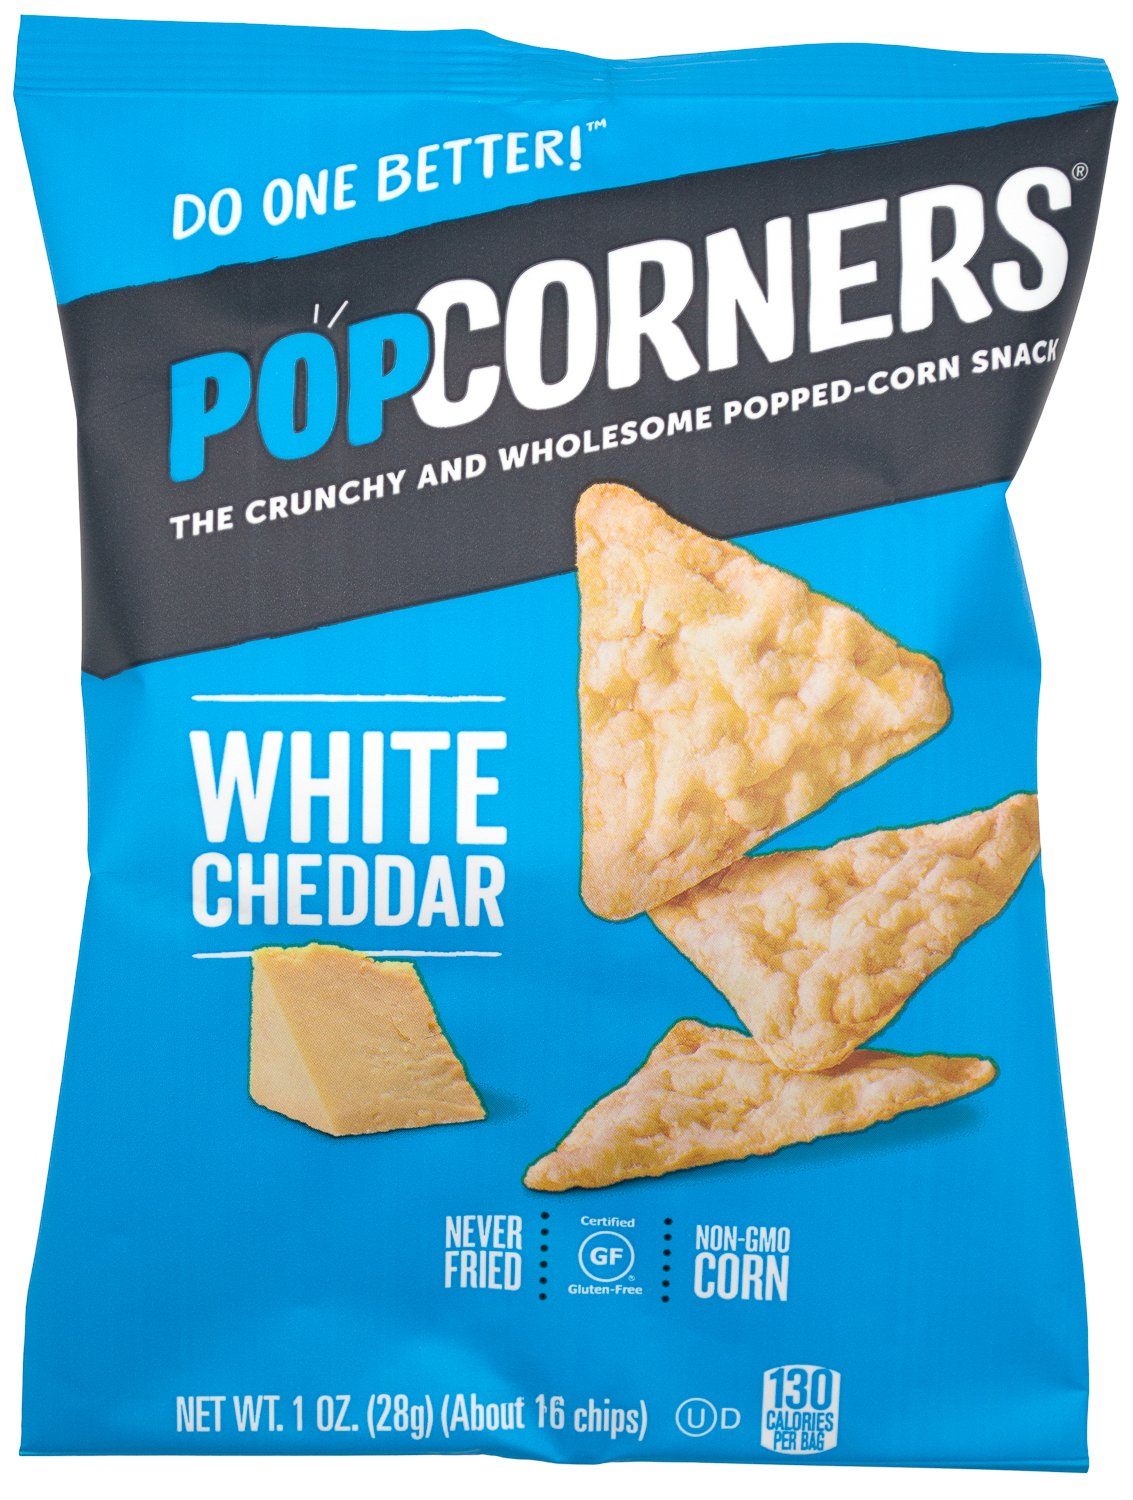 Popcorners - The Crunchy and Wholesome Popped-corn Snack Popcorners White Cheddar 1 Ounce 